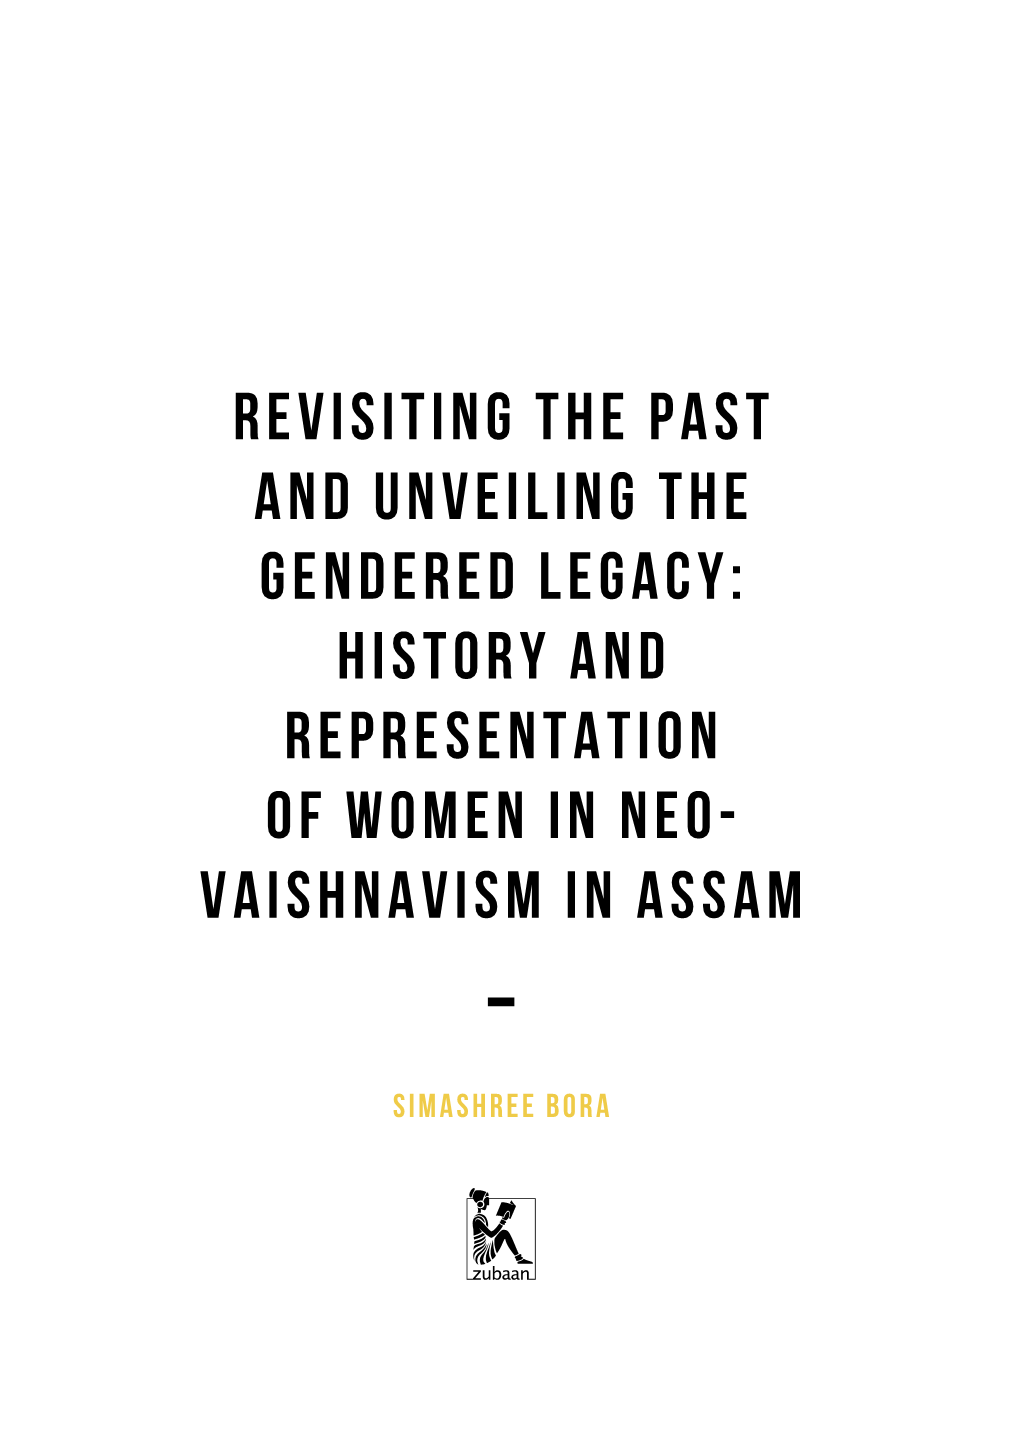 Revisiting the Past and Unveiling the Gendered Legacy: History and Representation of Women in Neo- Vaishnavism in Assam